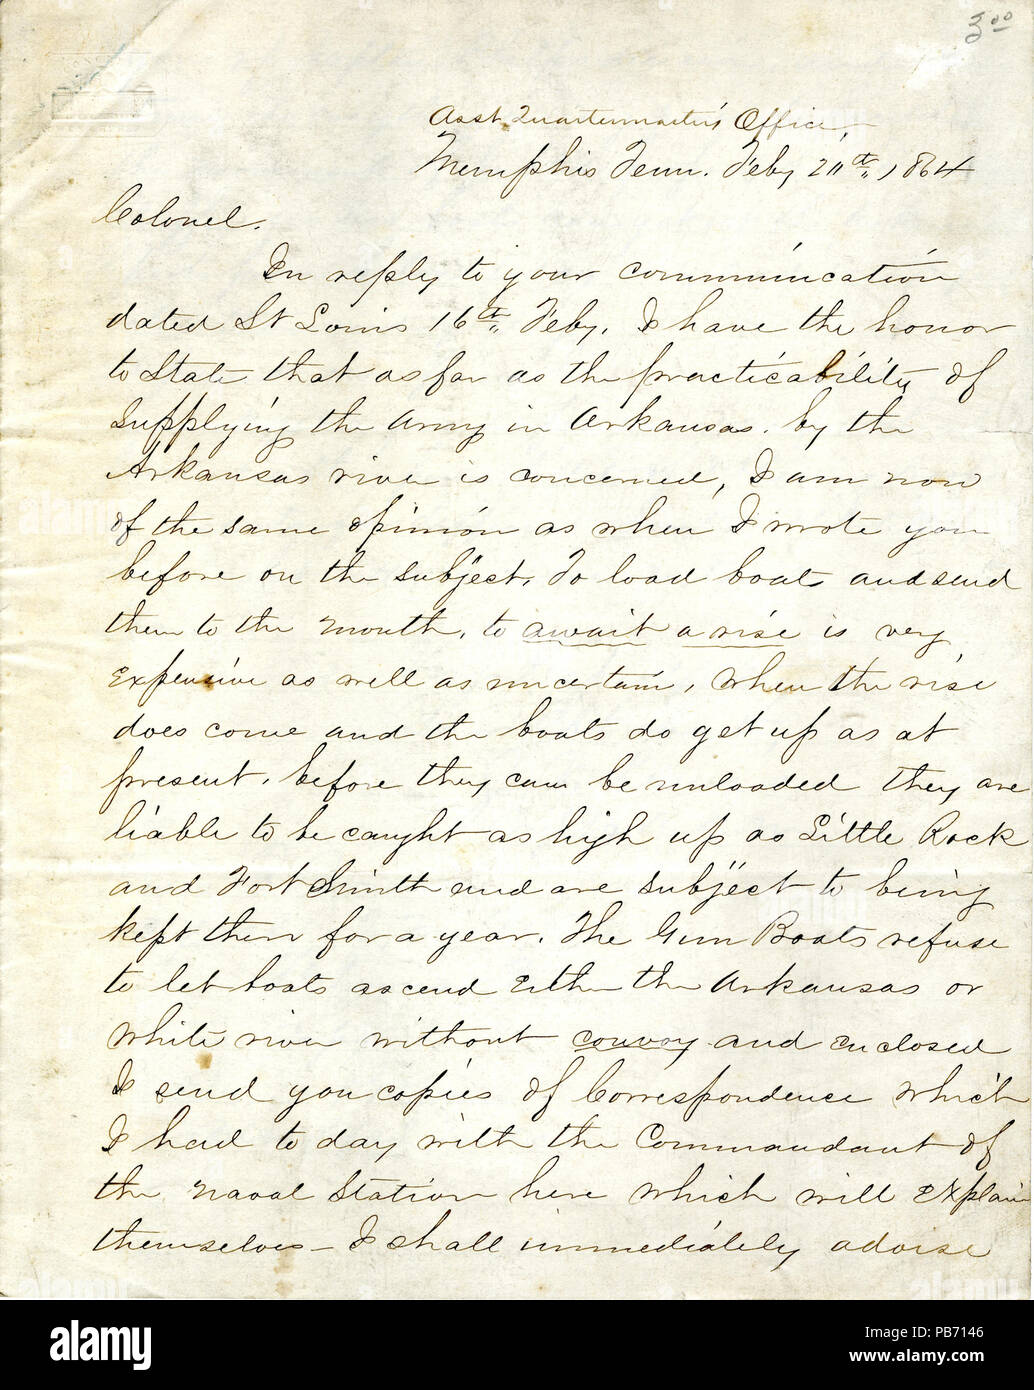 Letter from J.V. Lewis, Asst. Quartermaster’s Office, Memphis, Tenn., to Colonel Lewis B. Parsons, St. Louis, Mo., discussing the practicality of supplying the army in Arkansas by the Arkansas River, page one, 1864-02-26. Civil War Collection, Missouri History Museum, St. Louis, Missouri. 909 Letter signed J.V. Lewis, Asst. Quartermaster’s Office, Memphis, Tenn., to Colonel Lewis B. Parsons, St. Louis, Mo., February 26, 1864 Stock Photo